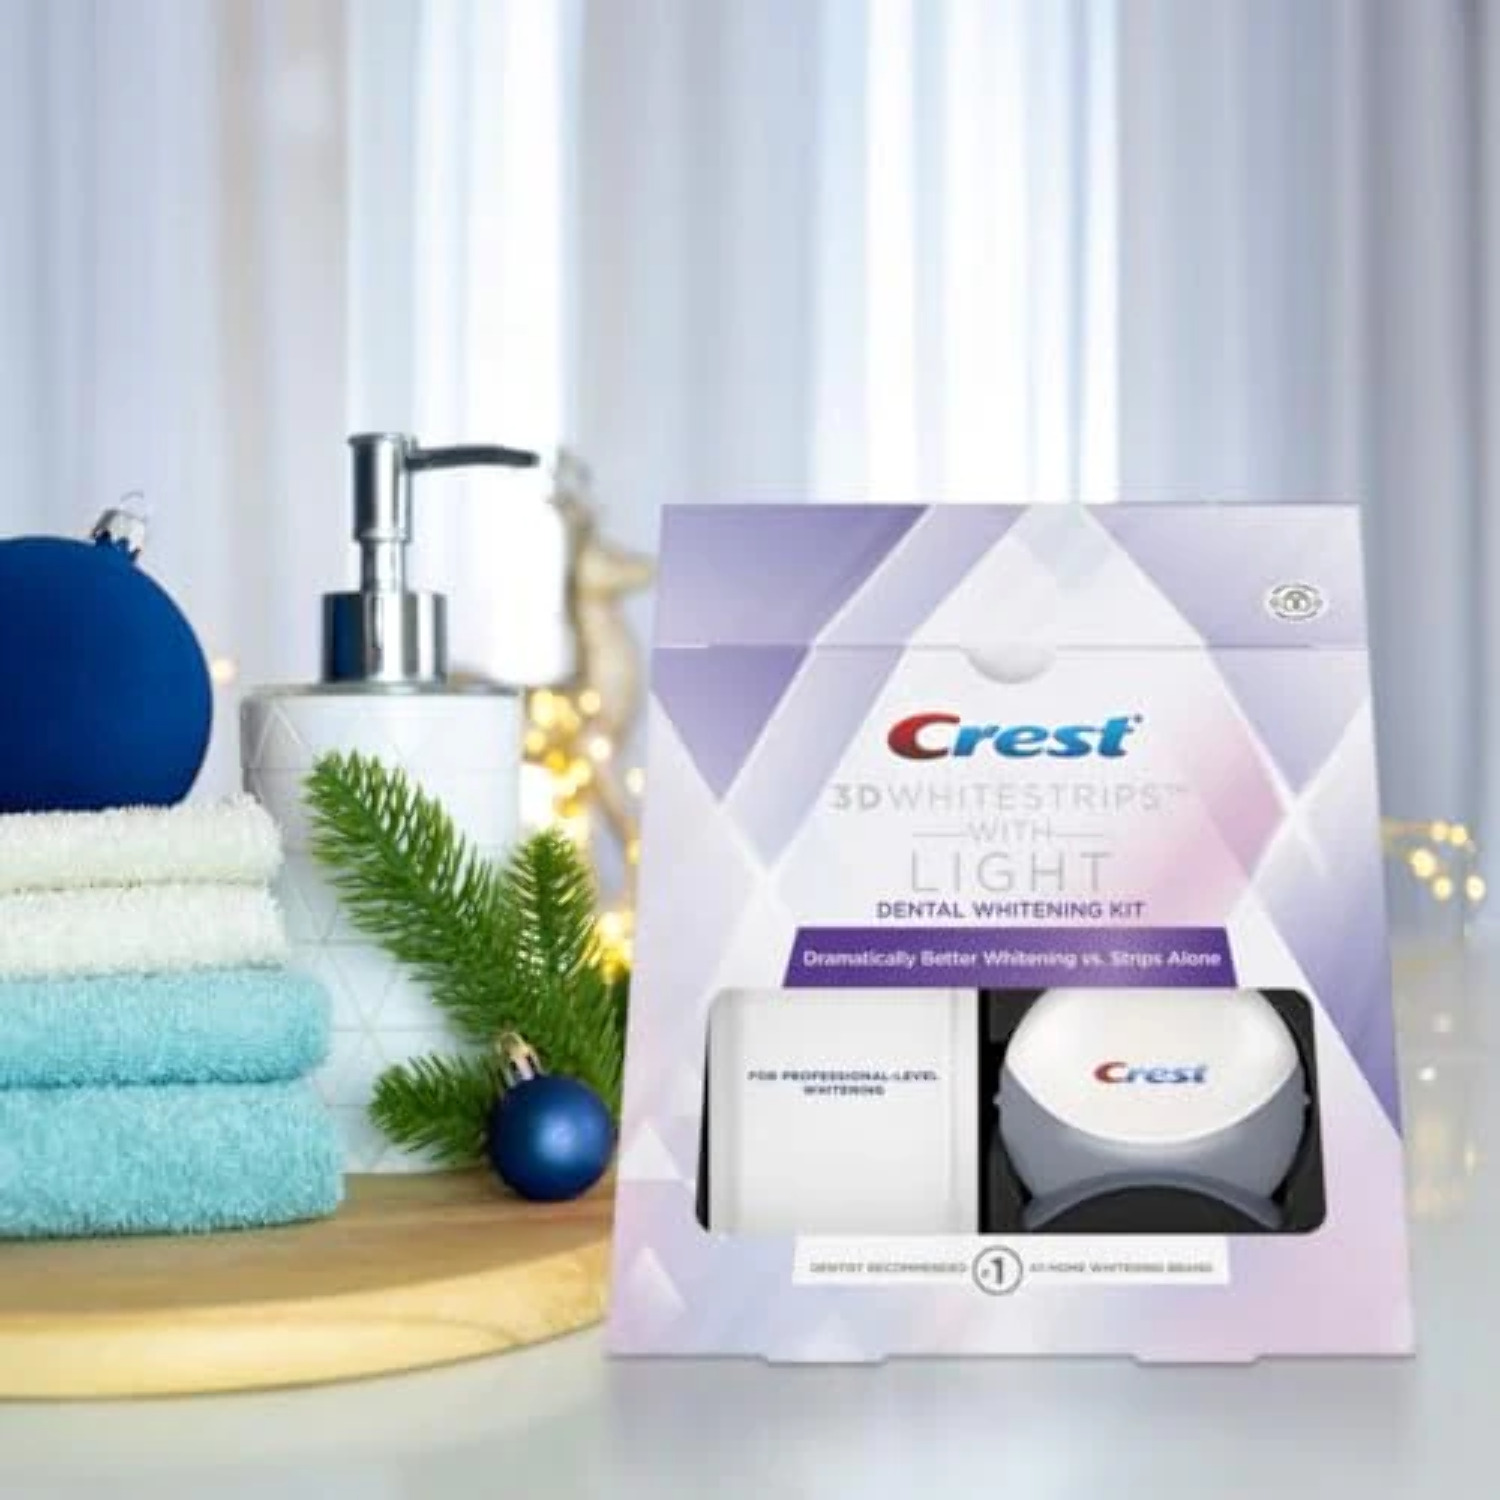 Crest 3D Whitestrips with Light Teeth Whitening Strip Kit, 10 Treatments - image 2 of 4